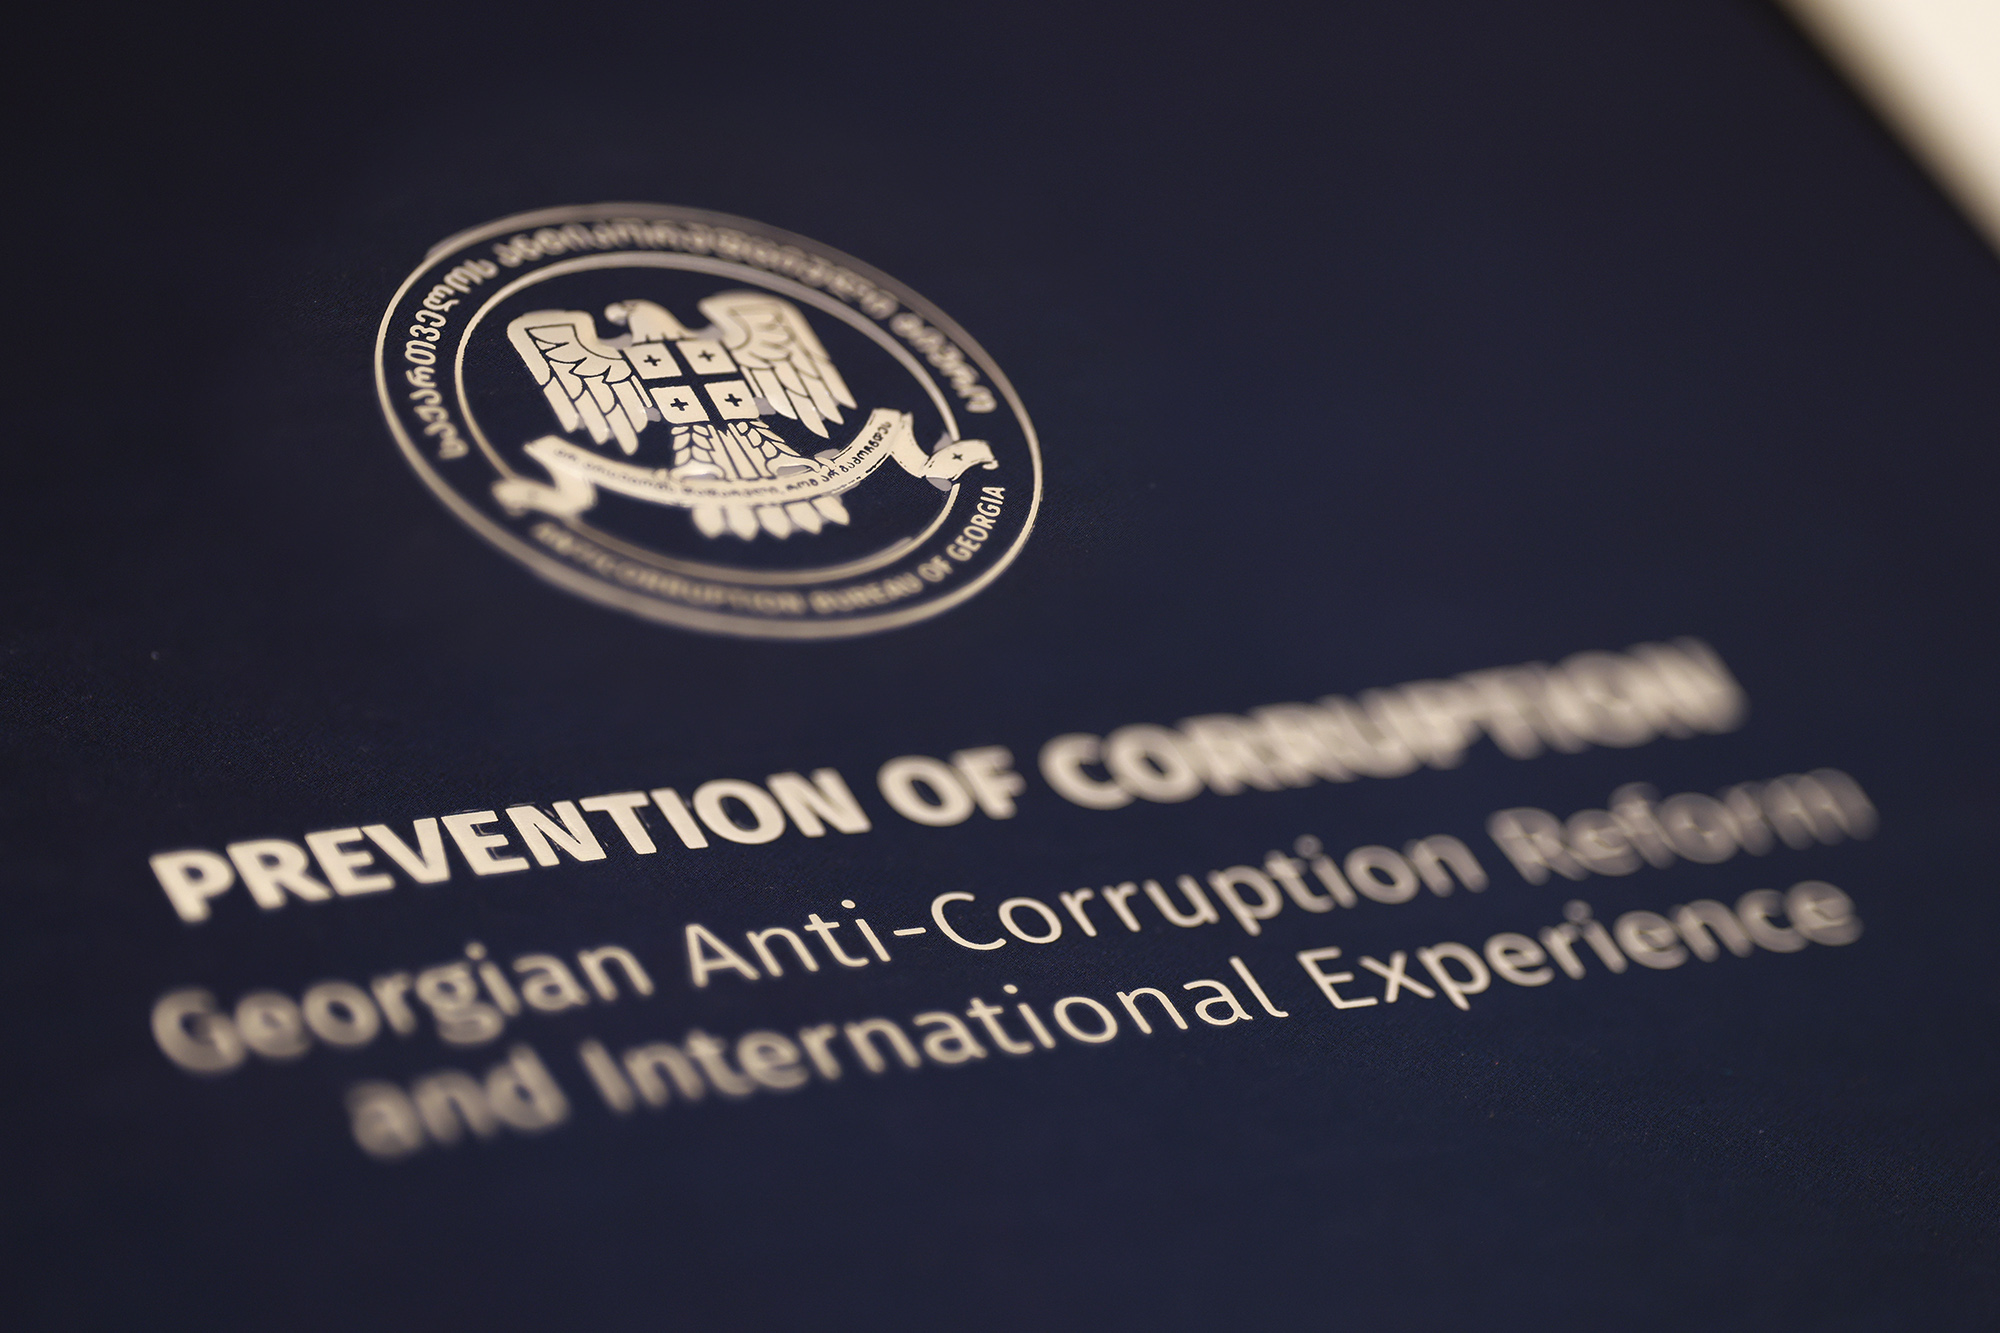 The Anti-Corruption Bureau organized an international conference titled " PREVENTION OF CORRUPTION: GEORGIAN ANTI-CORRUPTION REFORM AND INTERNATIONAL EXPERIENCE."